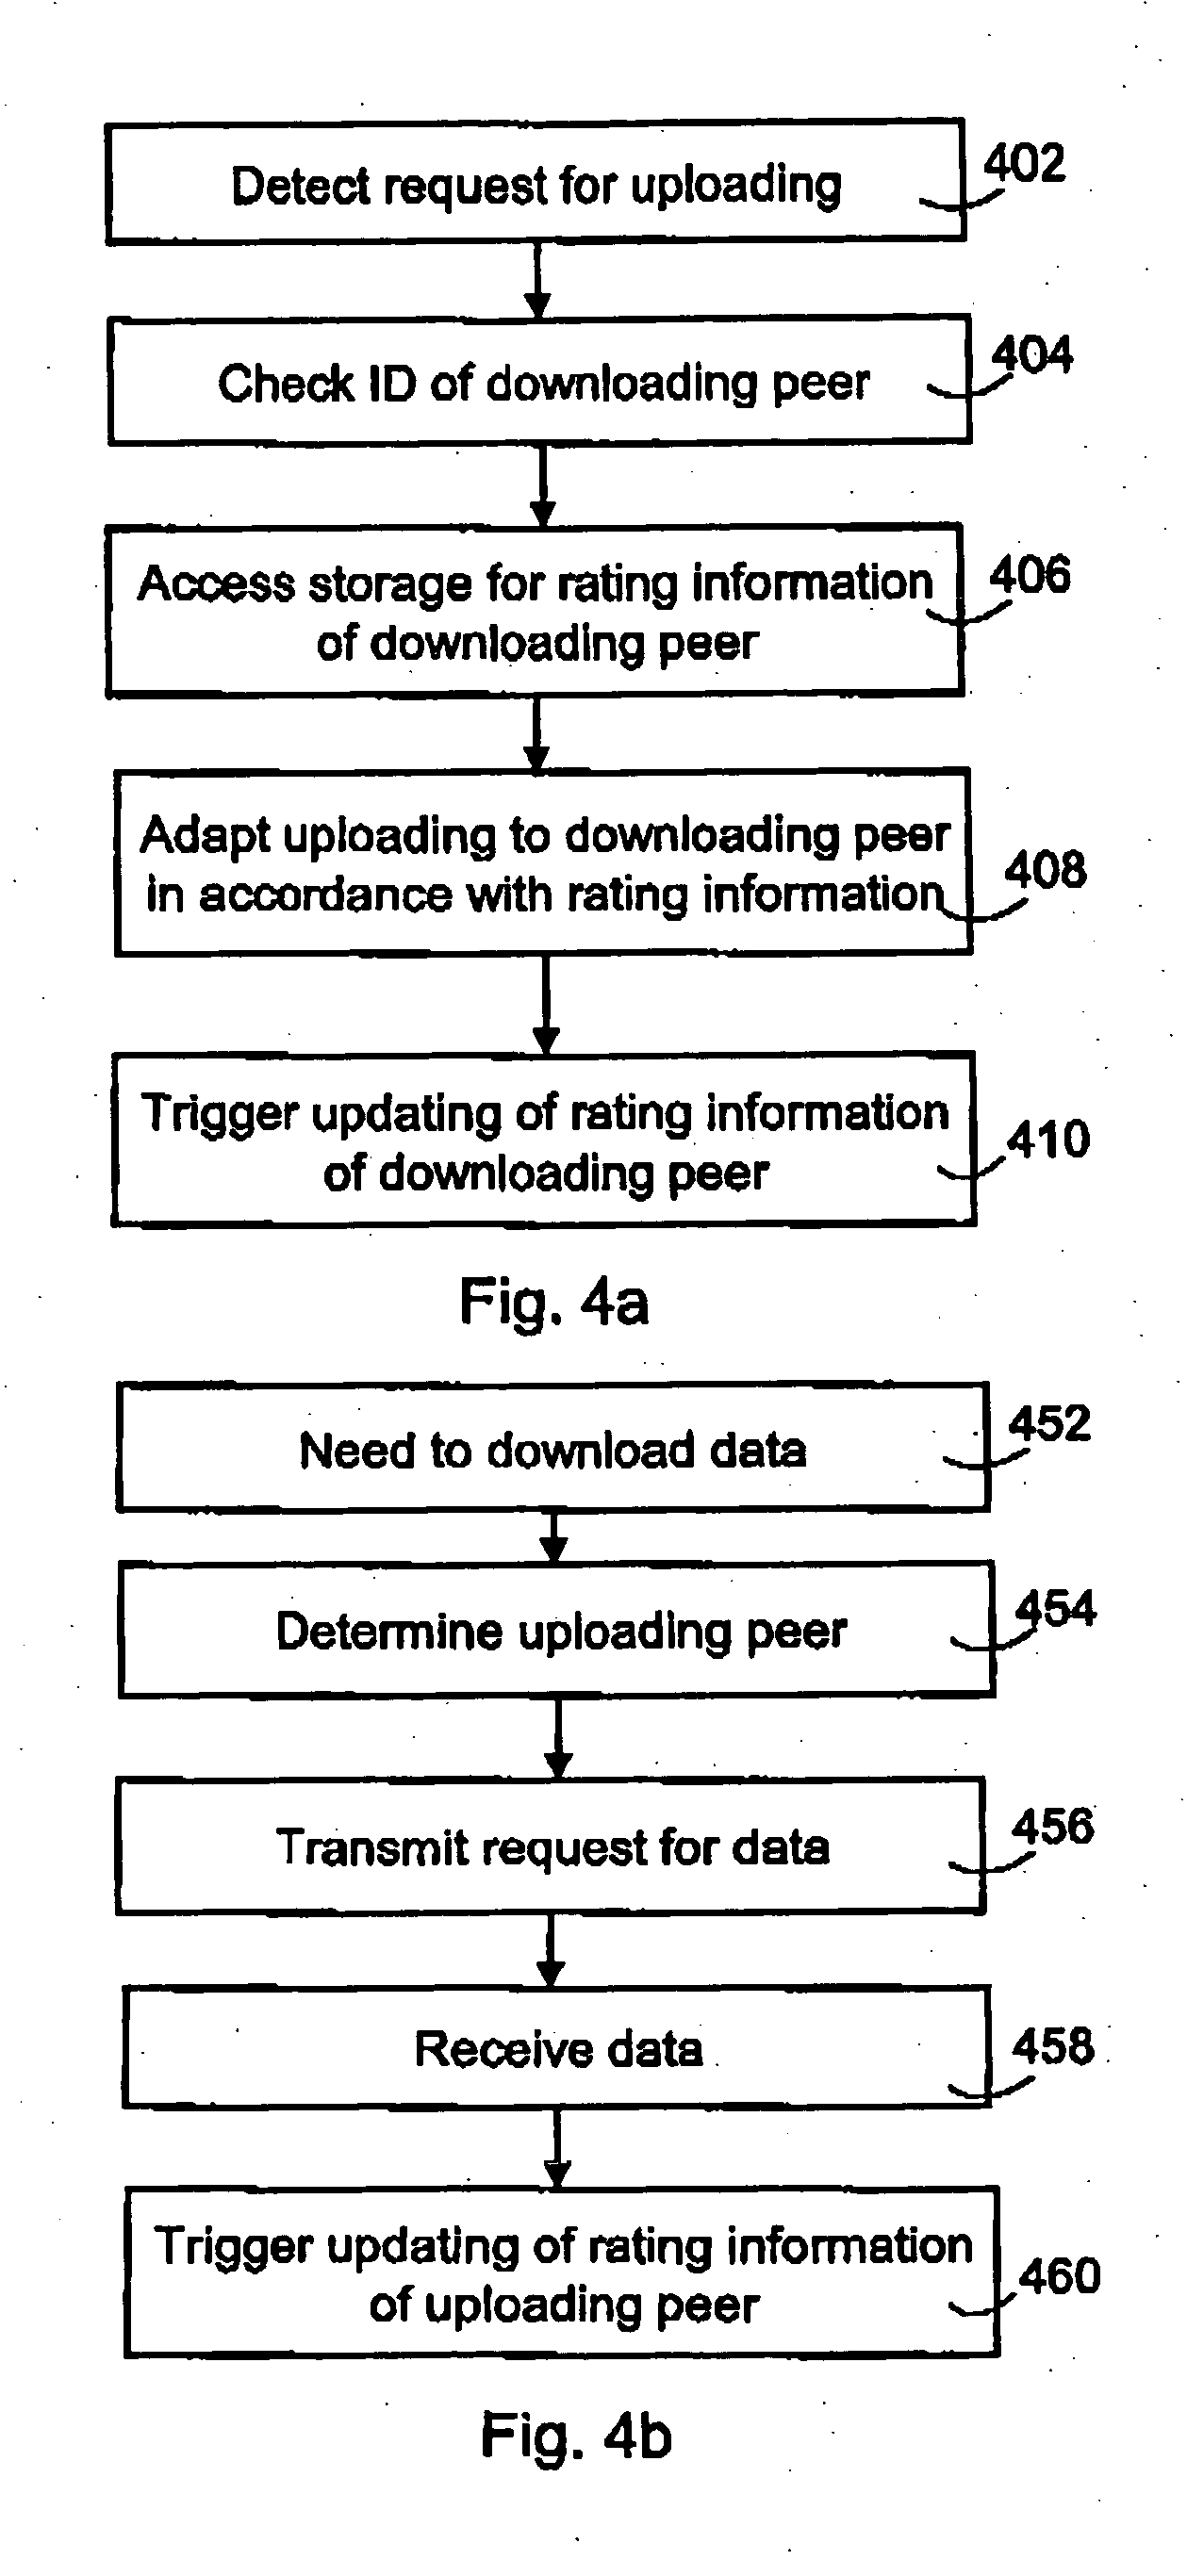 Service provision in peer-to-peer networking environment